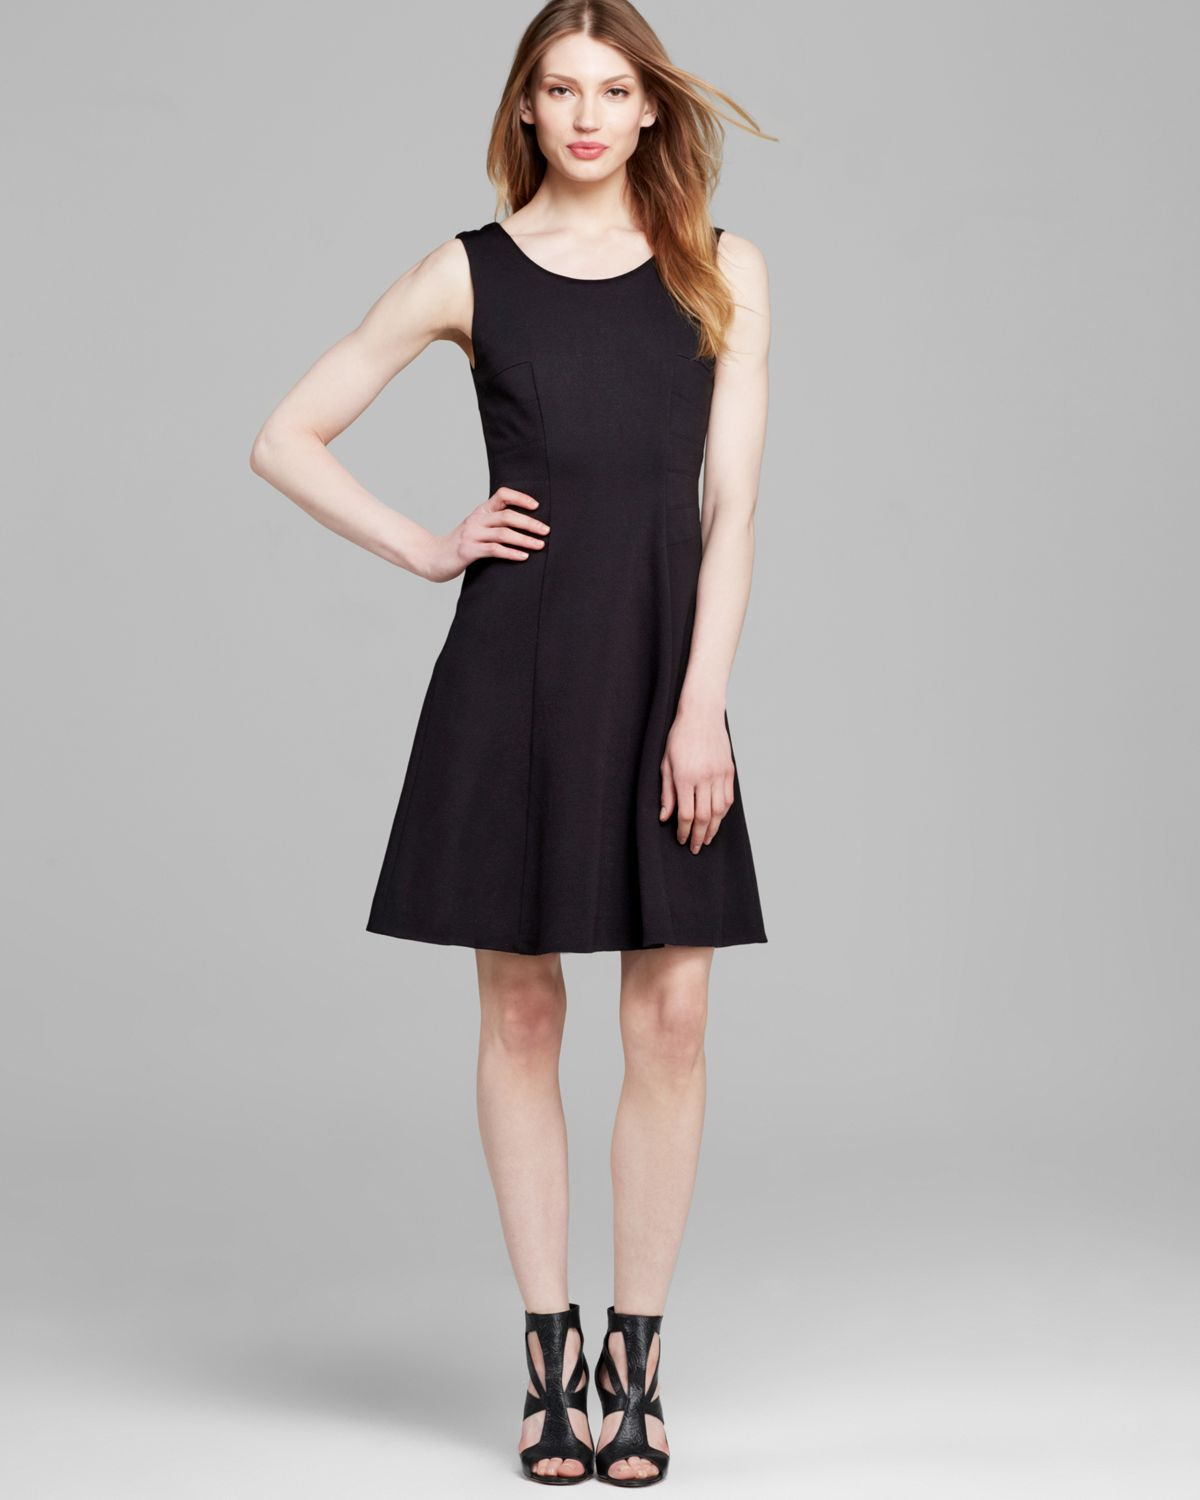 Rachel roy Fit and Flare Dress in Black | Lyst